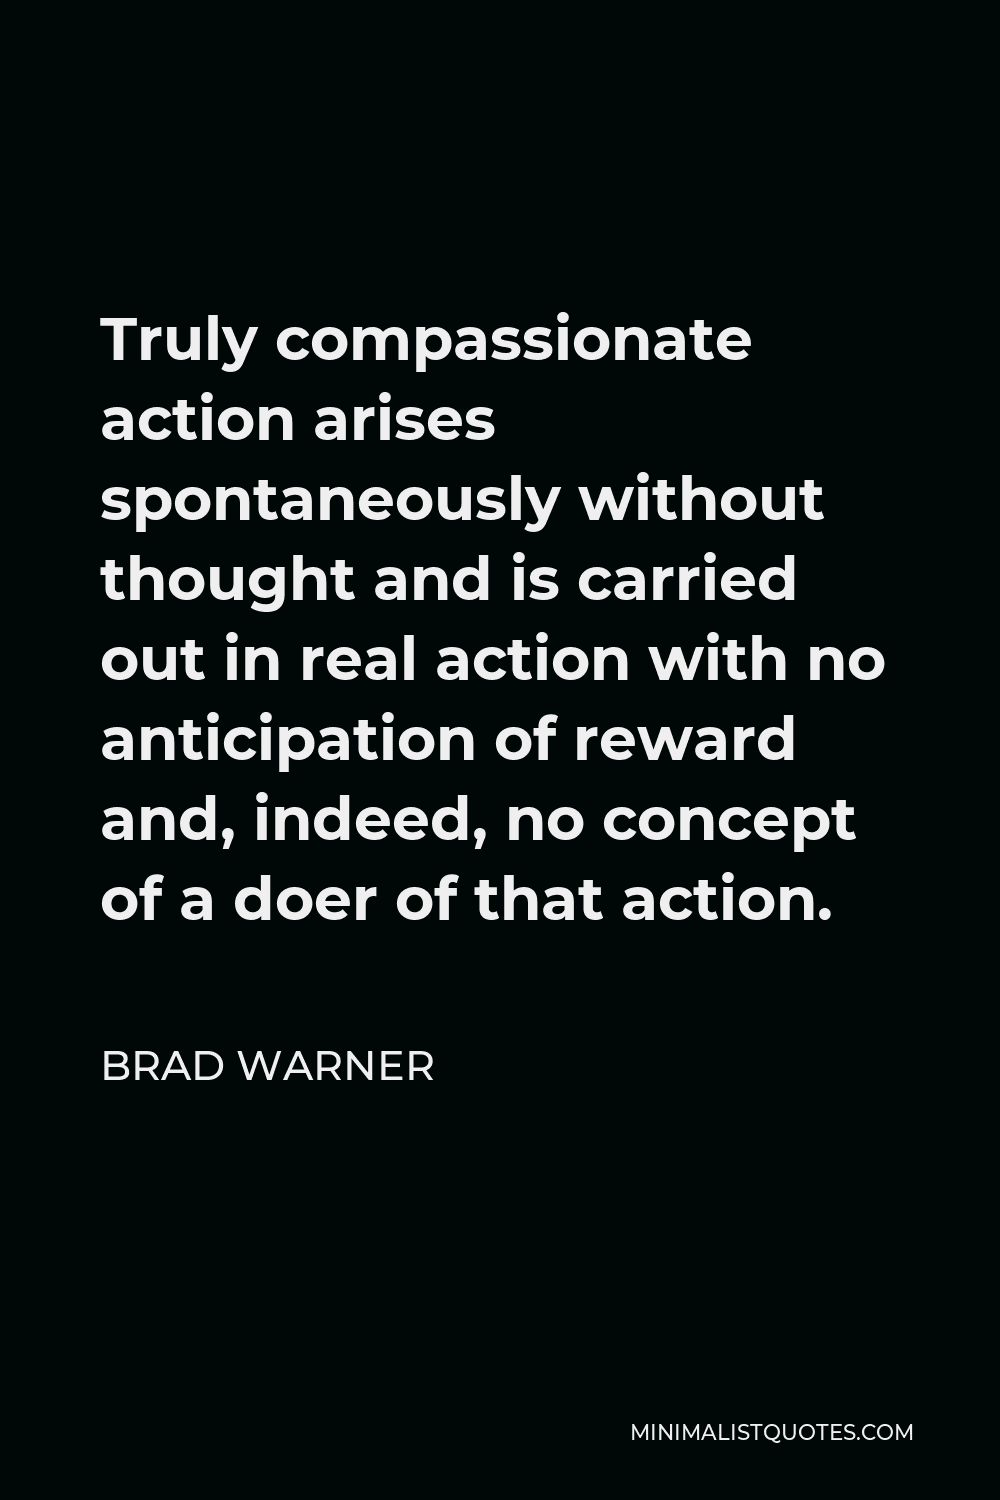 Brad Warner Quote - Truly compassionate action arises spontaneously without thought and is carried out in real action with no anticipation of reward and, indeed, no concept of a doer of that action.